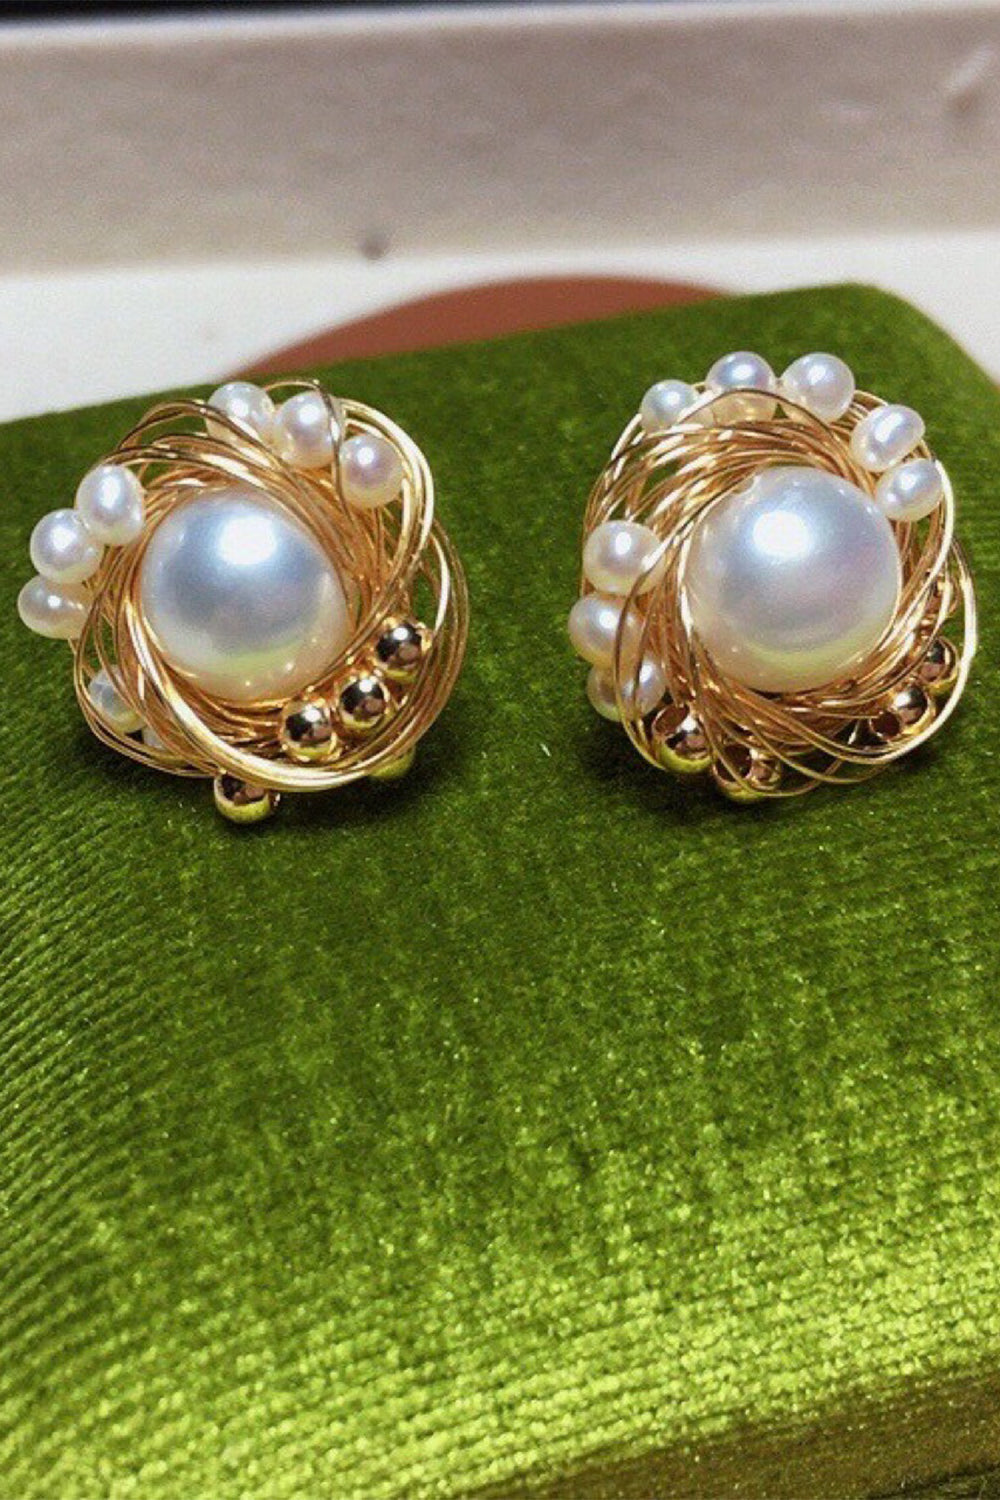 White Natural Pearls Metal Earrings Wedding Party Jewelry